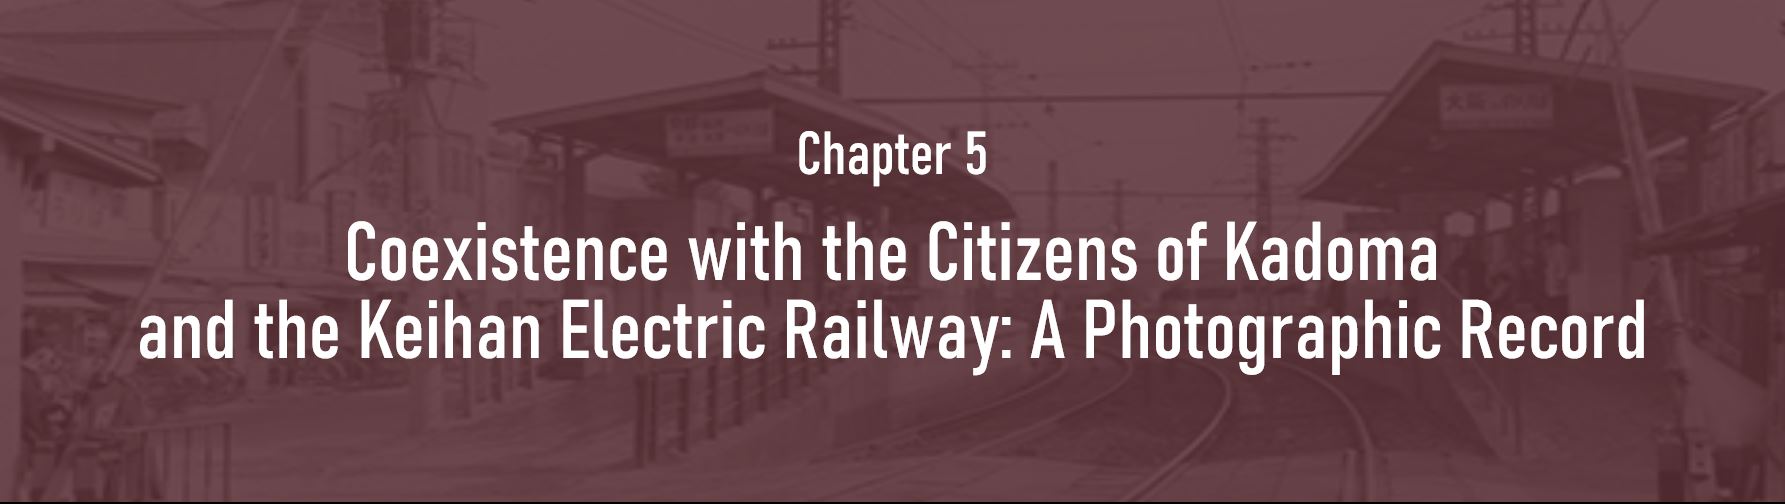 Chapter 5. Coexistence with the Citizens of Kadoma and the Keihan Electric Railway: A Photographic Record